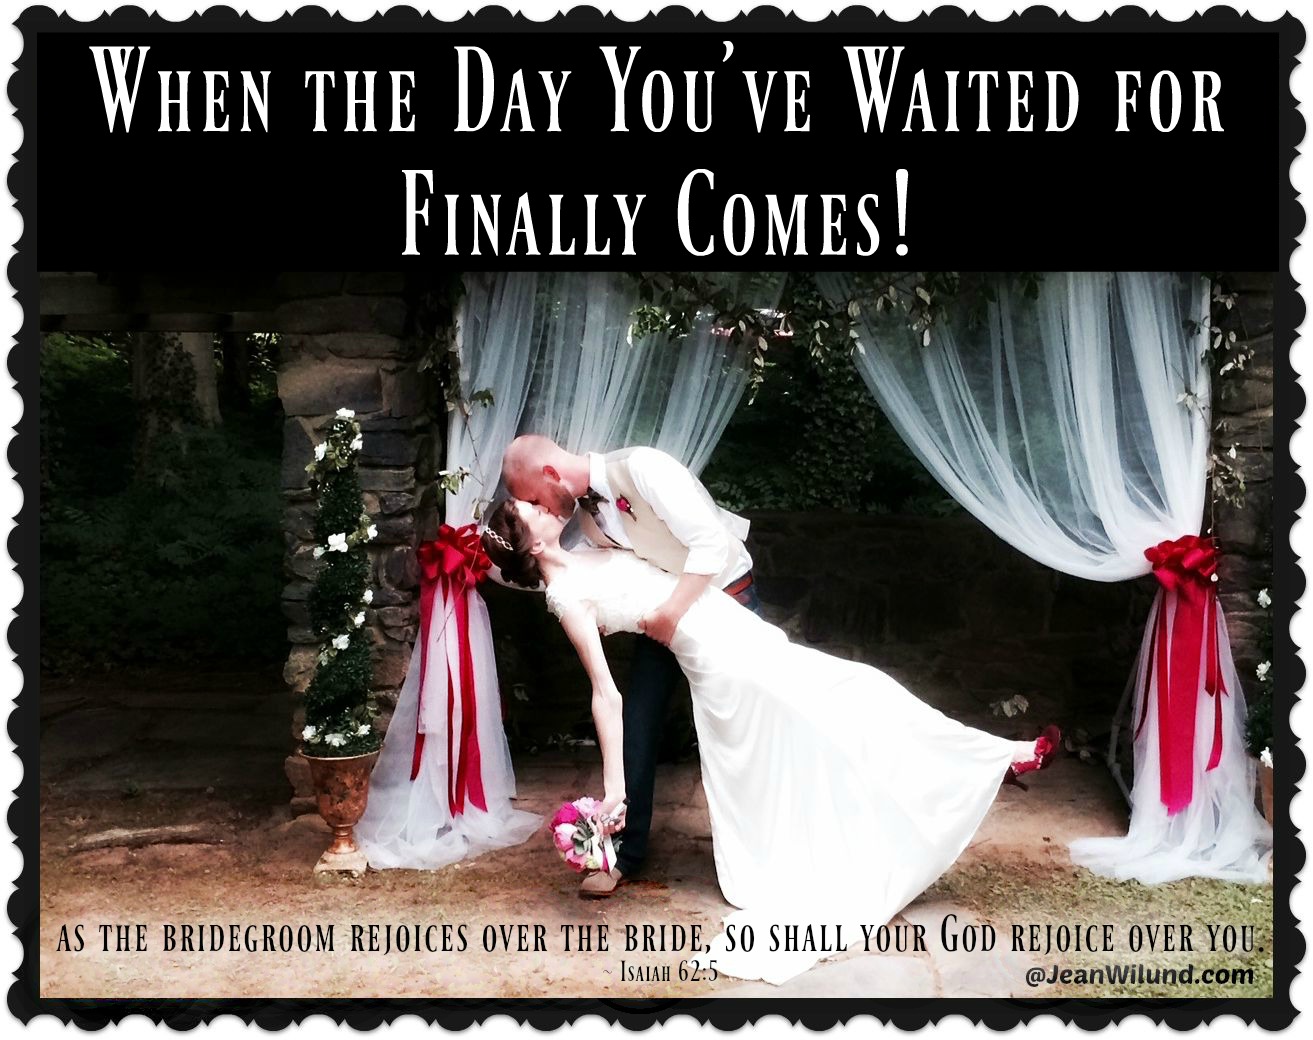 When the day you've waited for finally comes! via JeanWilund.com